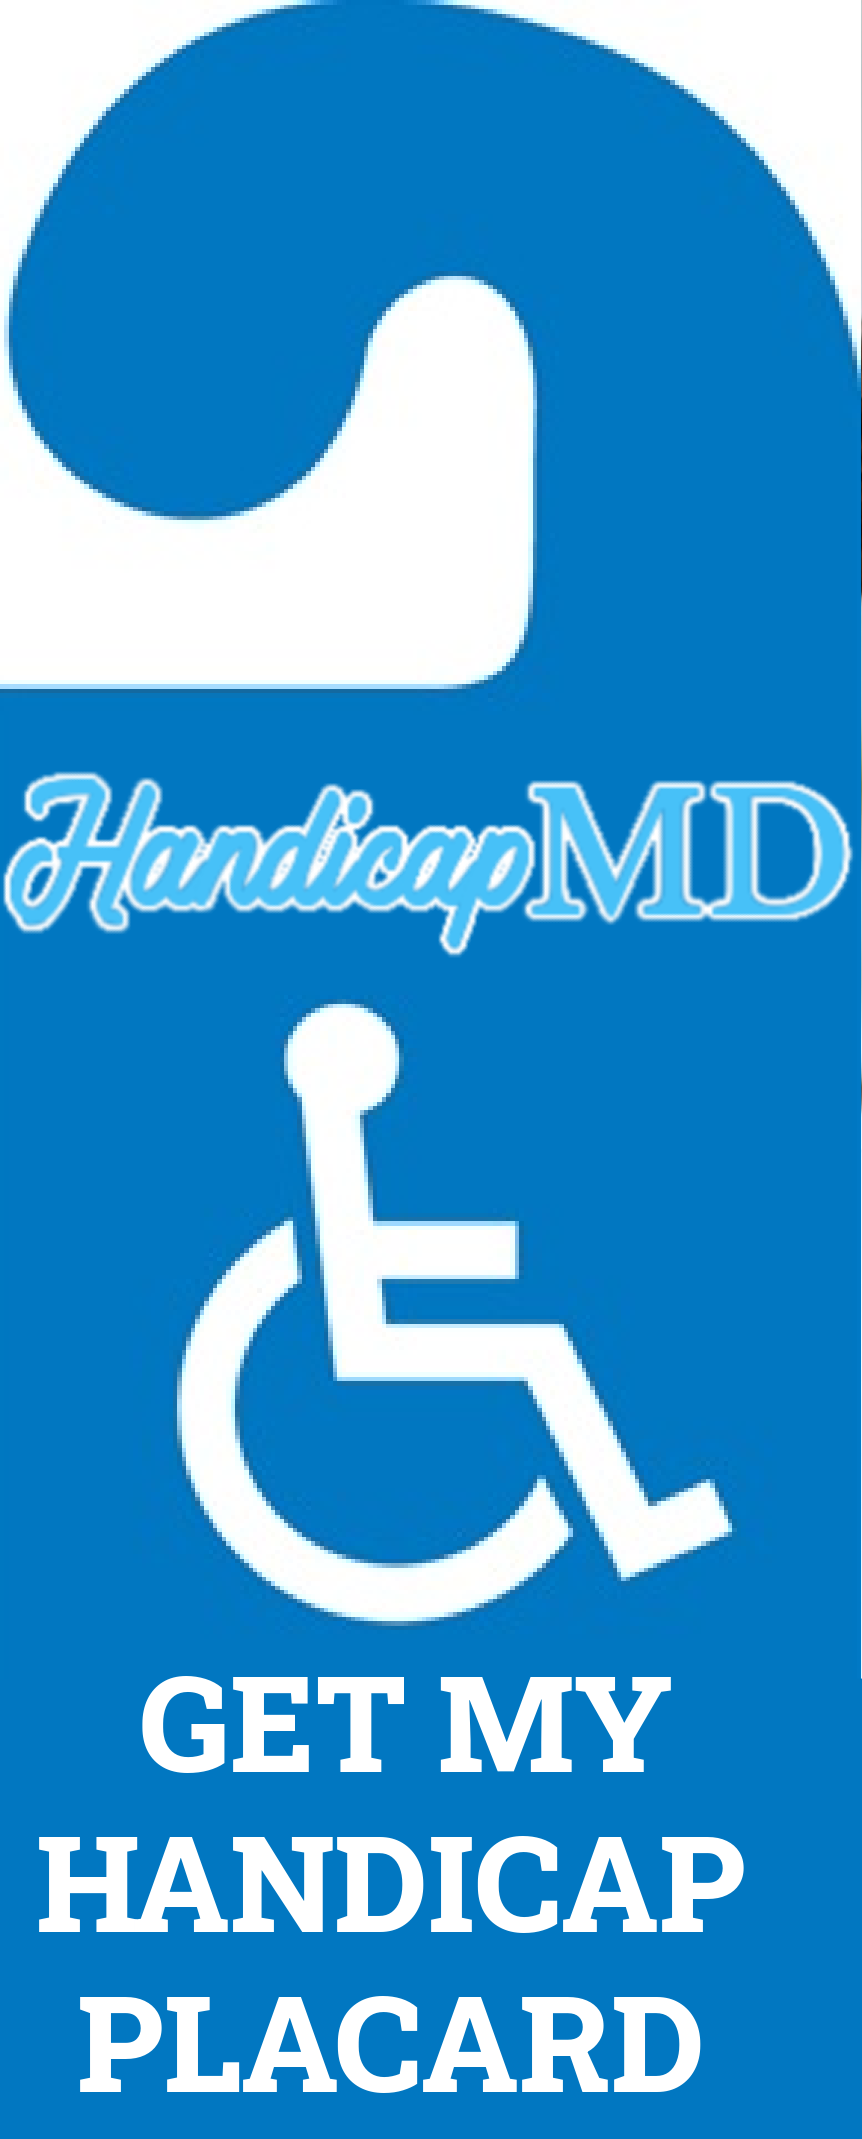 How to Replace a Lost or Stolen Handicap Placard in Connecticut